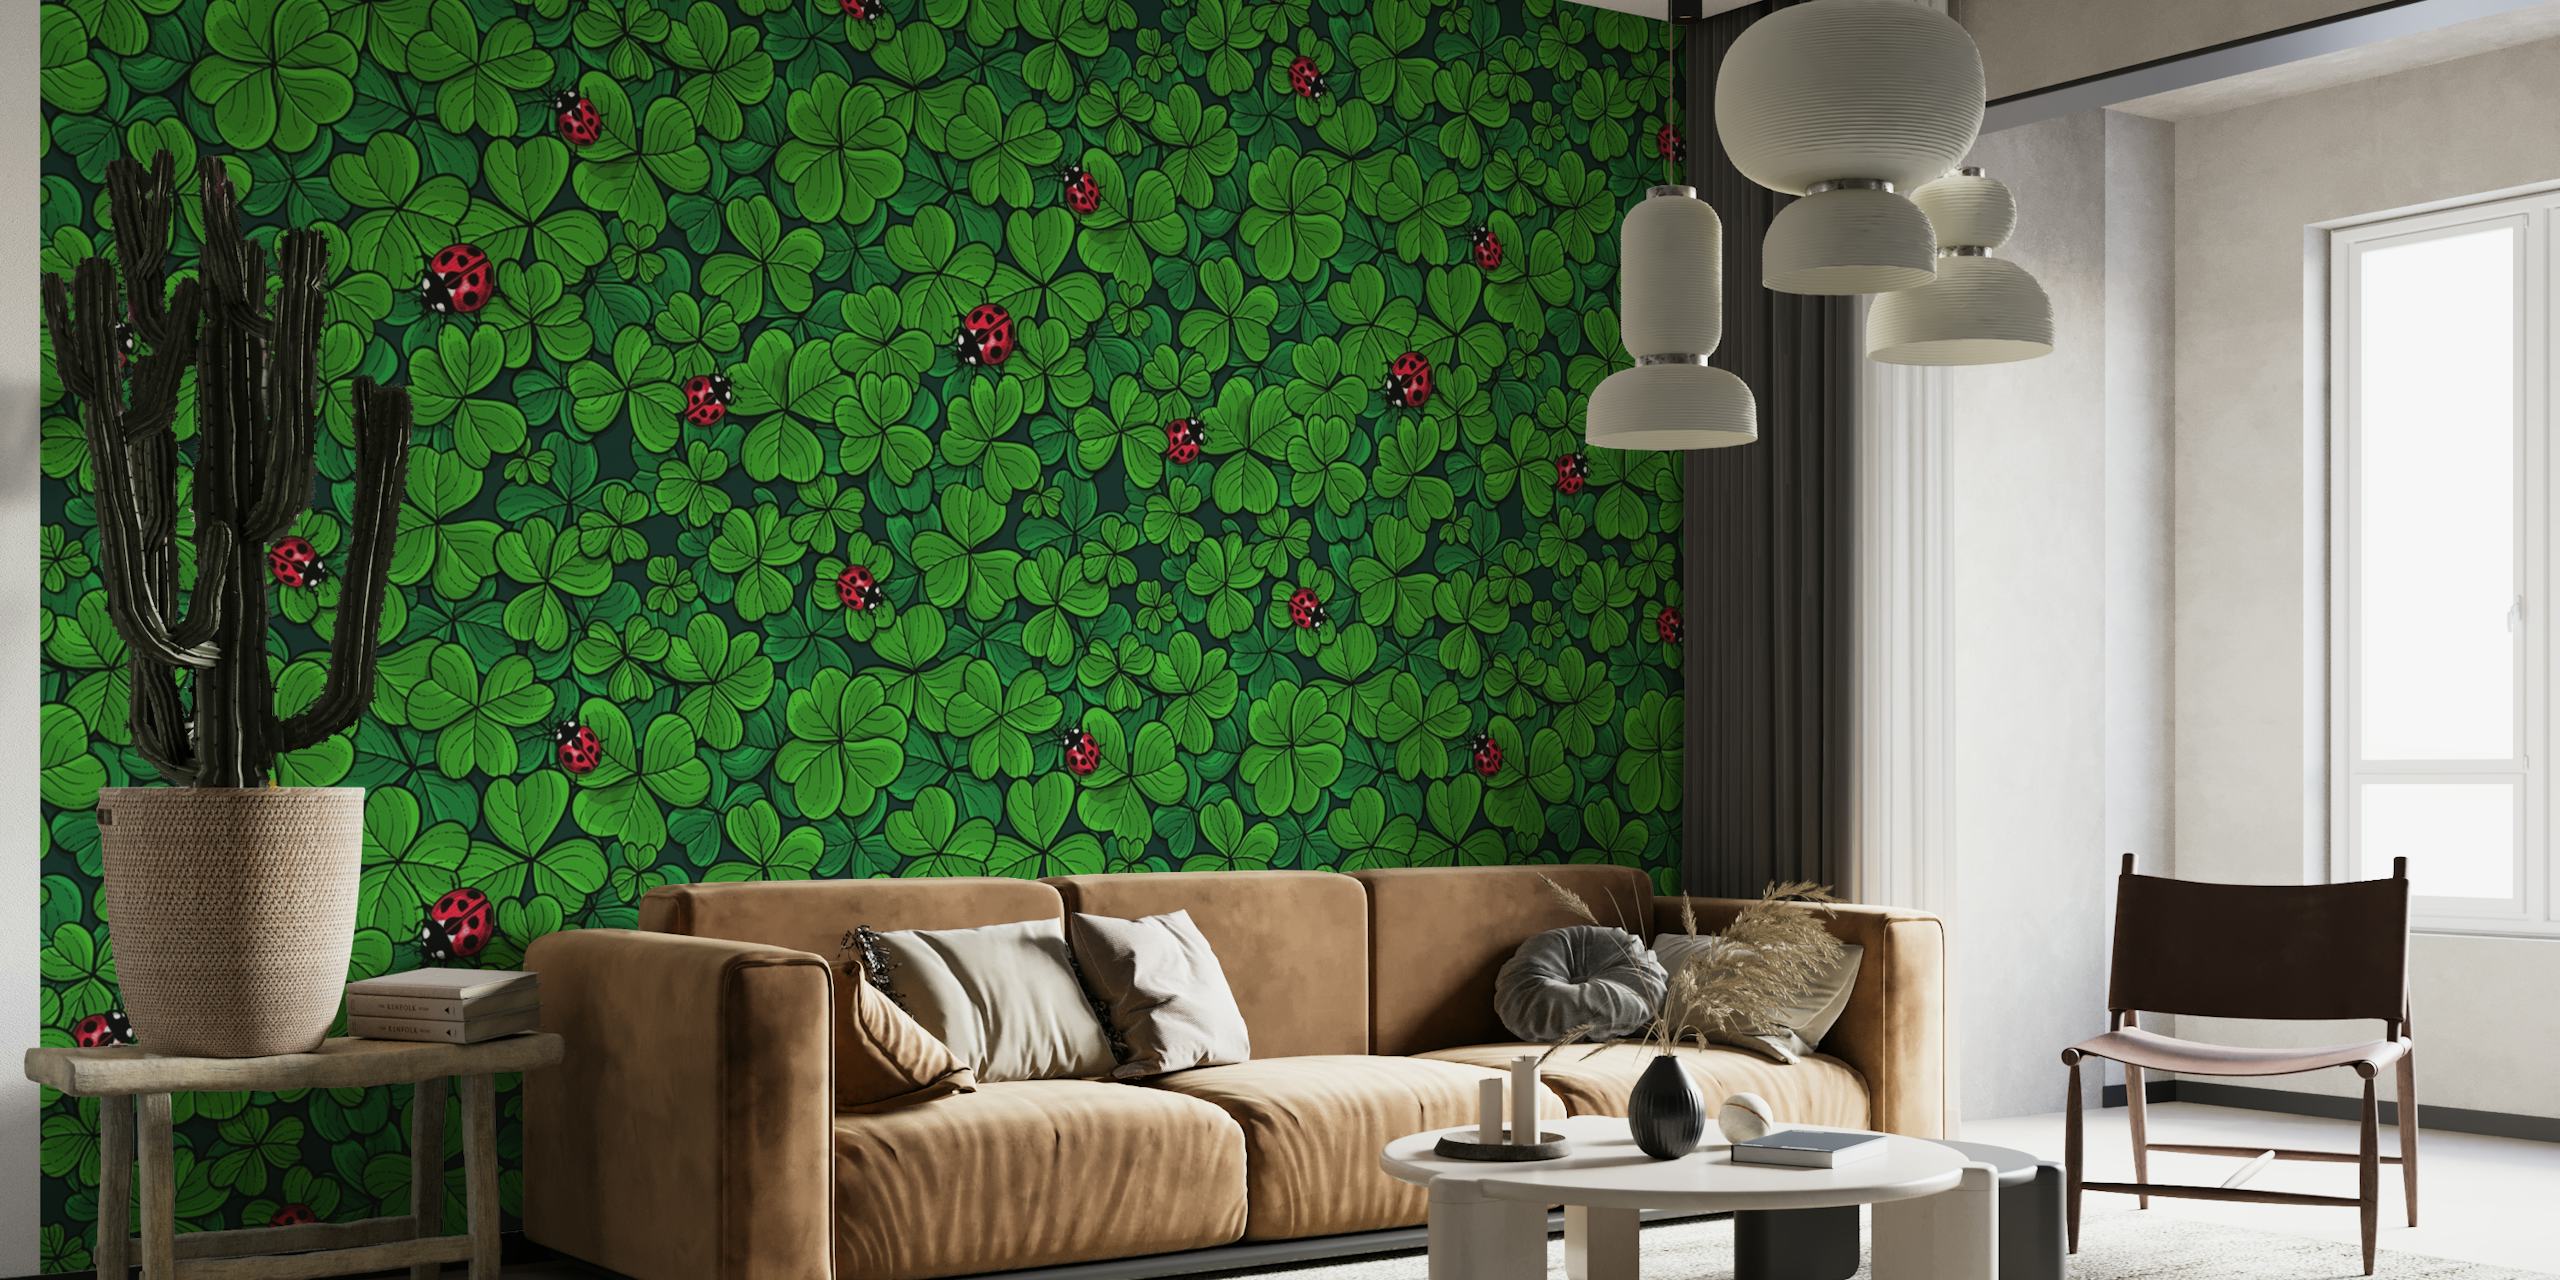 Green clover and red flower pattern wall mural 'Find the Lucky Clover 5'